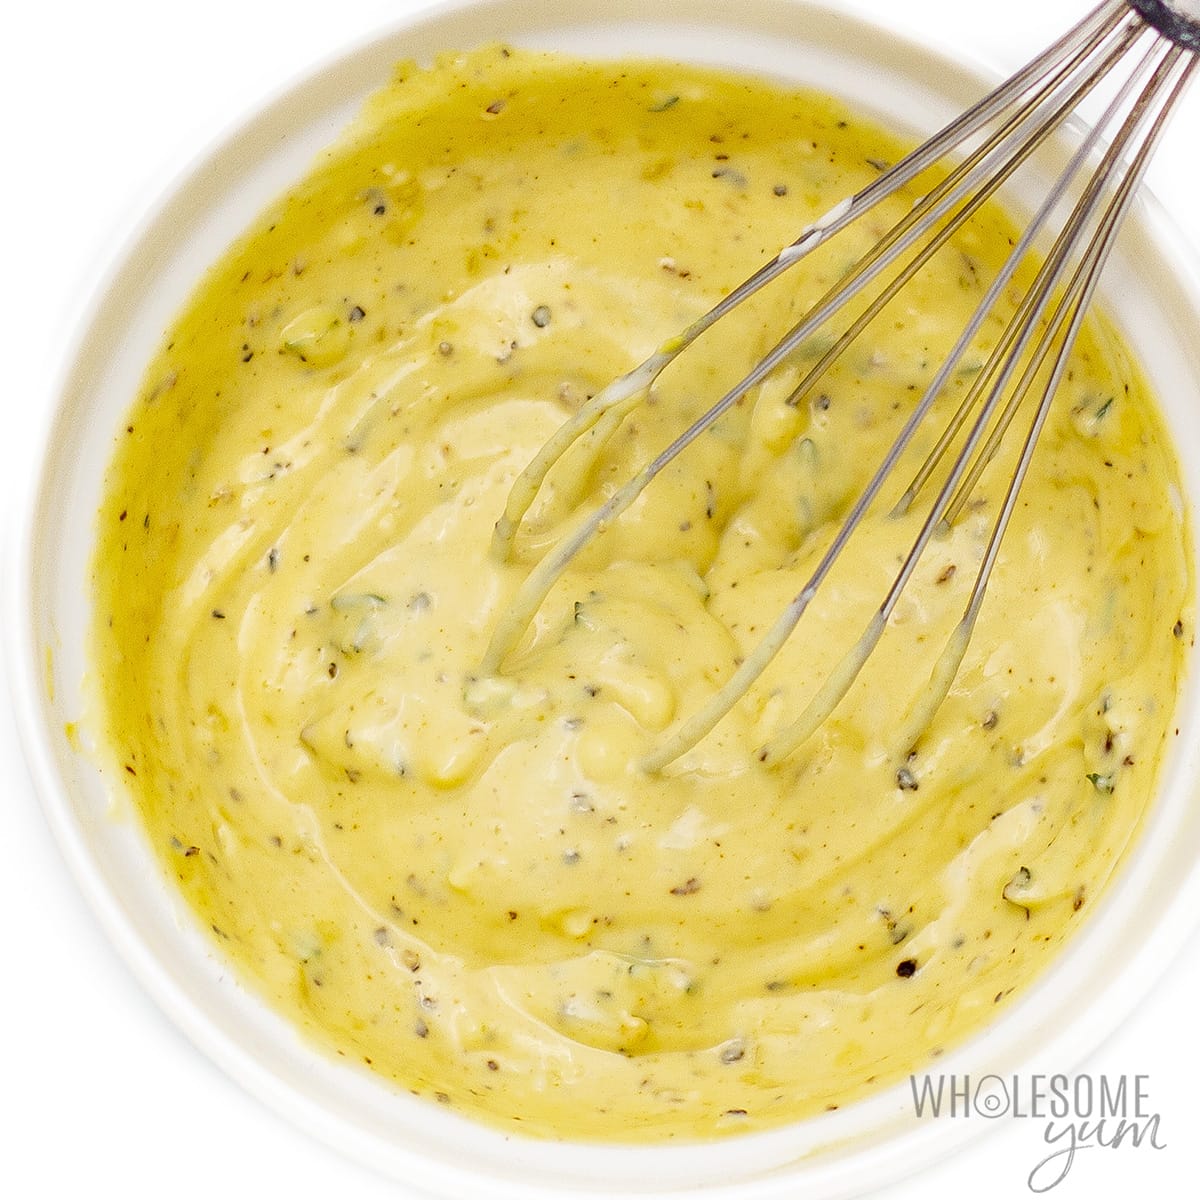 Salad dressing with whisk.